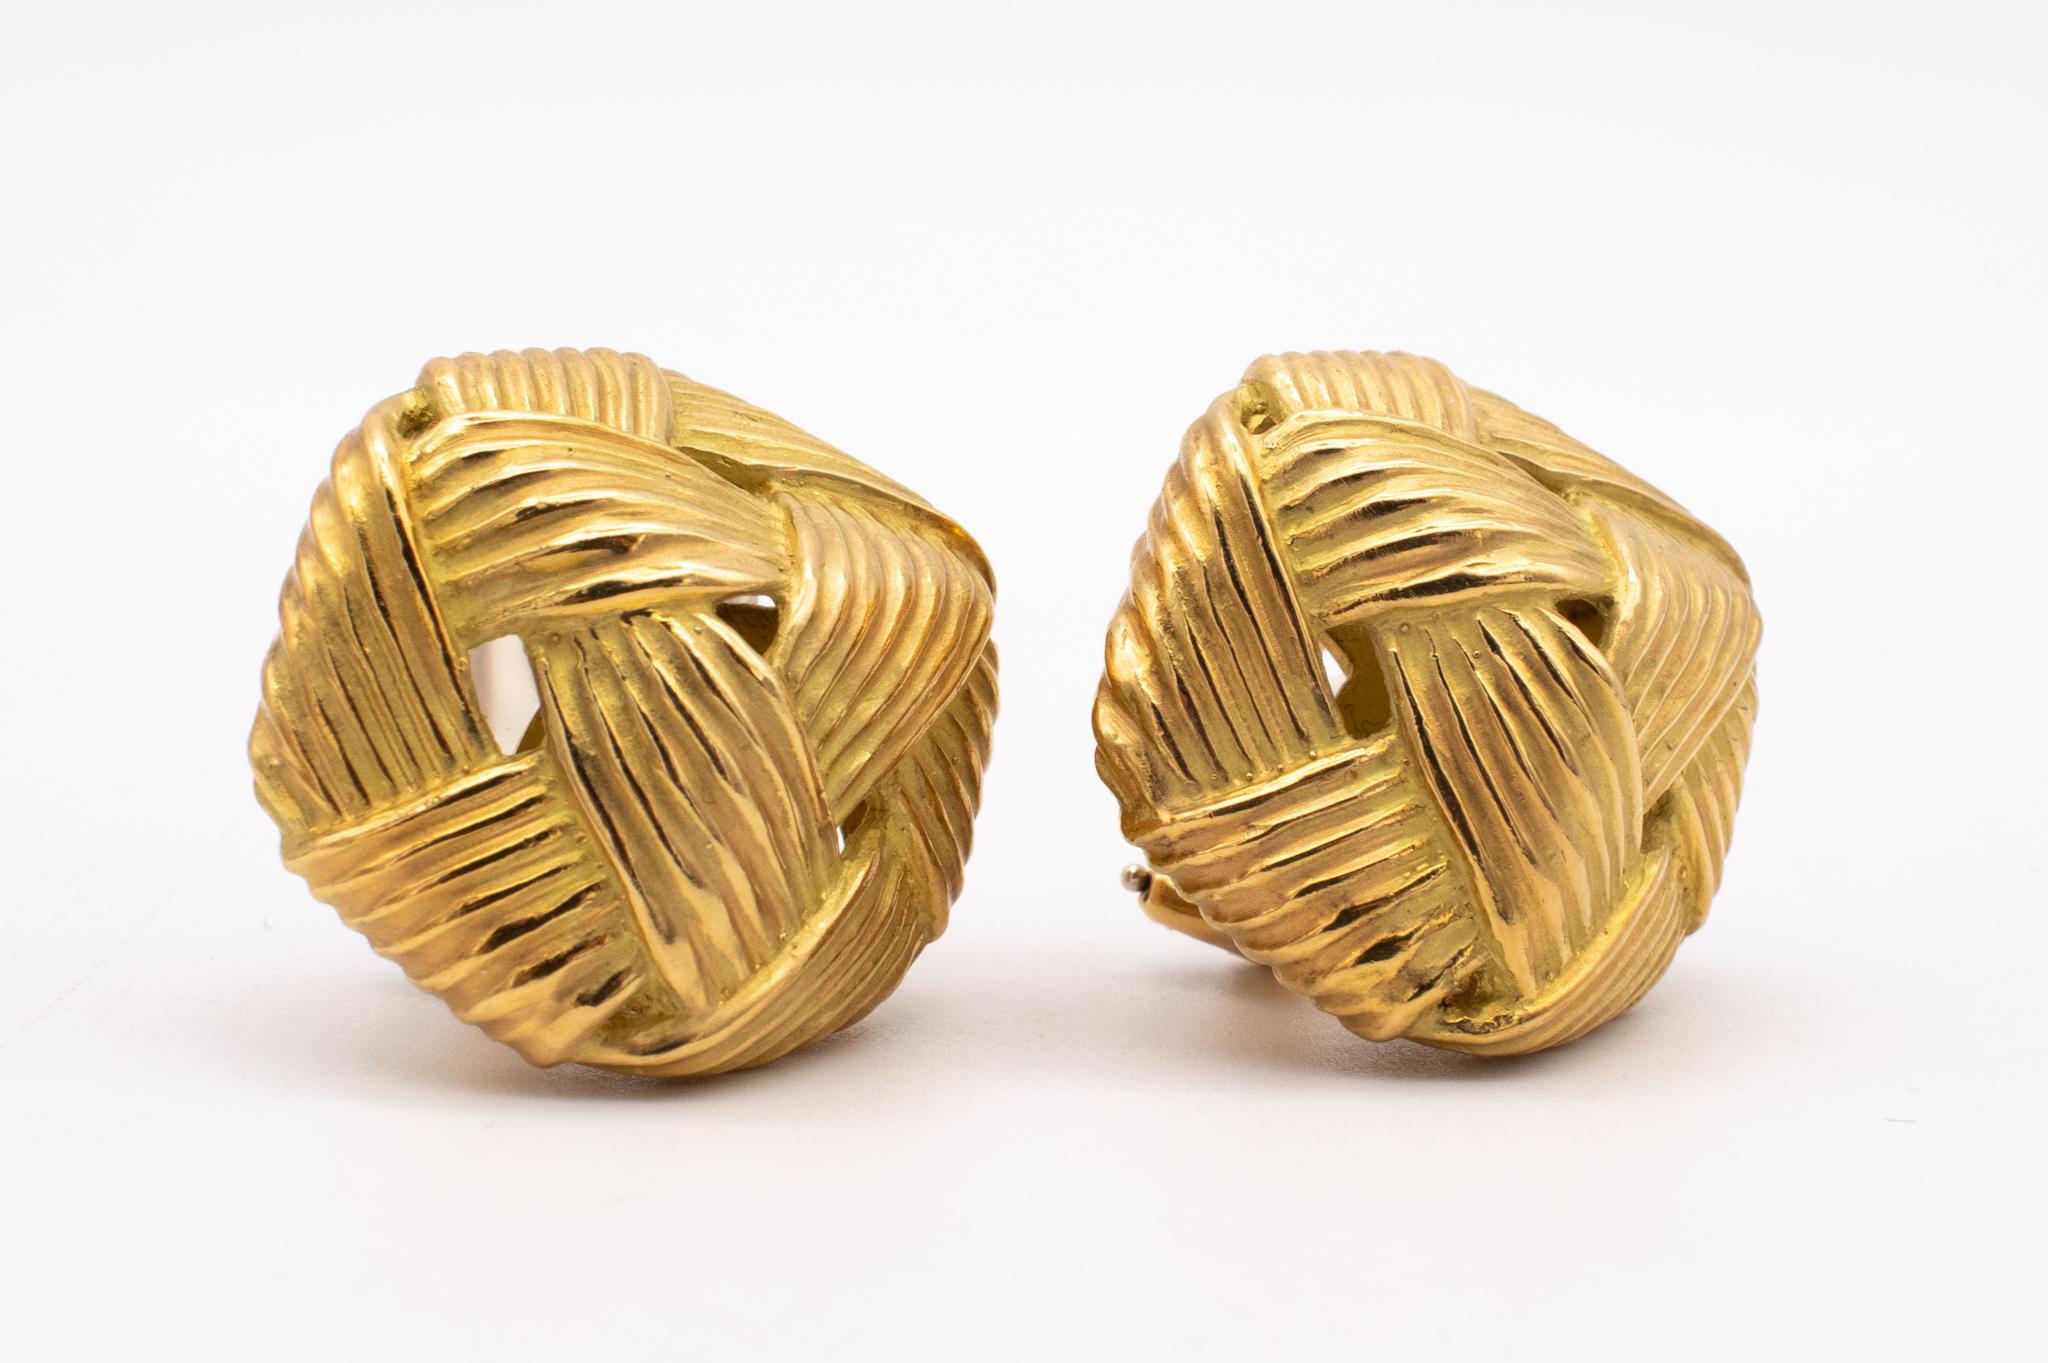 Angela Cummings 1984 Studio Textured Wrapped Earrings in Solid 18Kt Yellow Gold For Sale 2